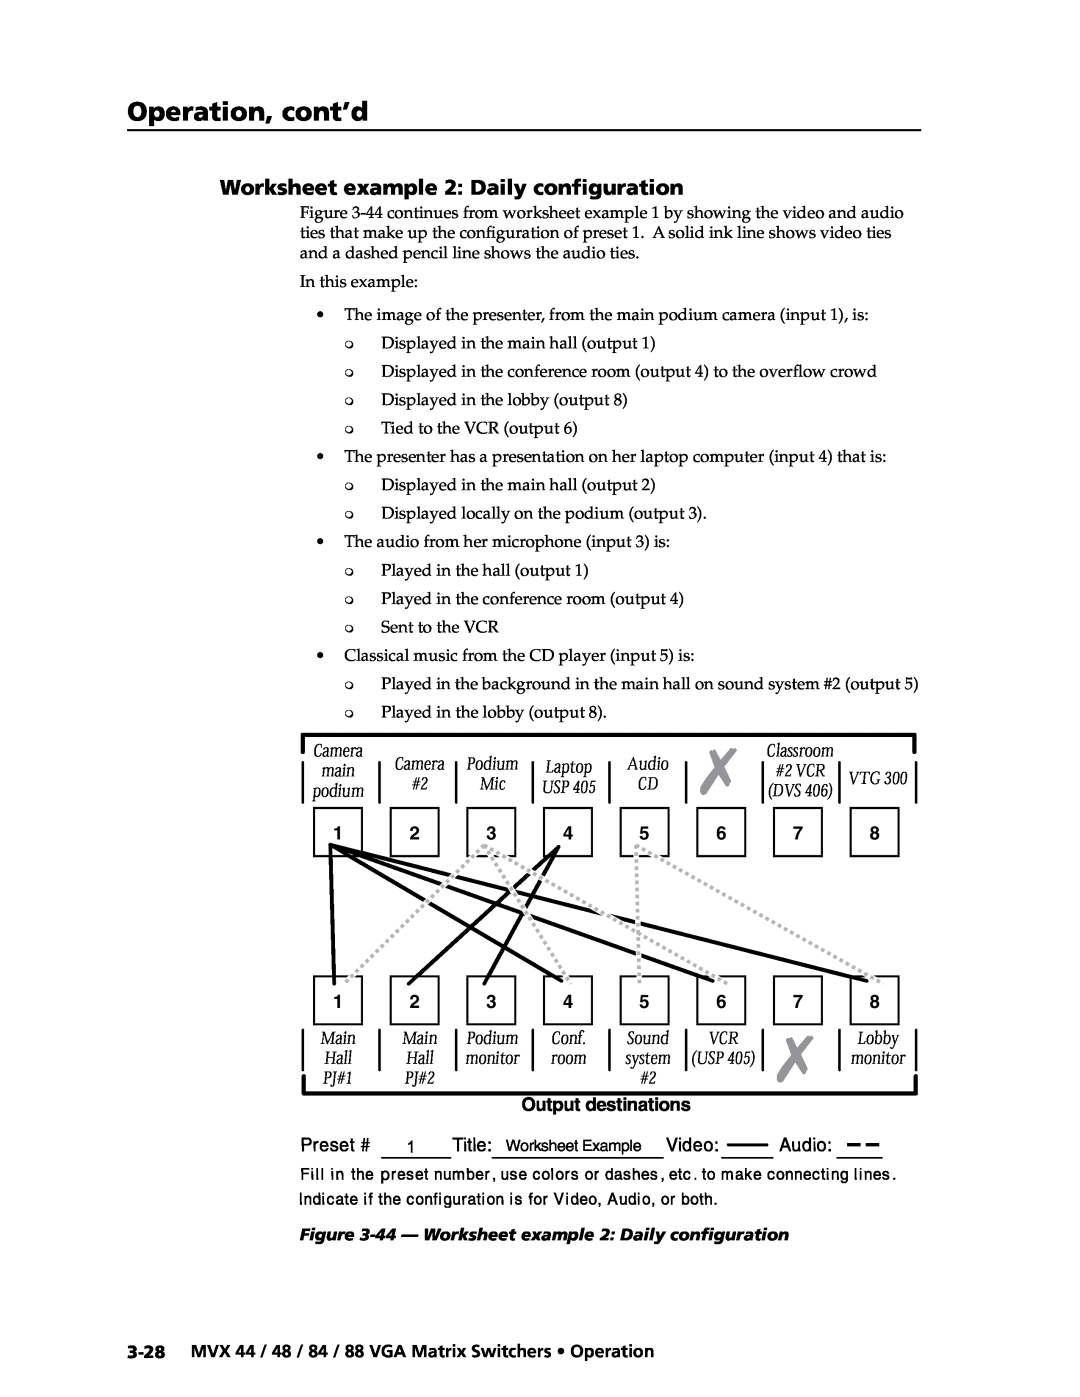 Extron electronic MVX 88 Series 44 - Worksheet example 2 Daily configuration, Preliminary, Operation, cont’d, Sound 